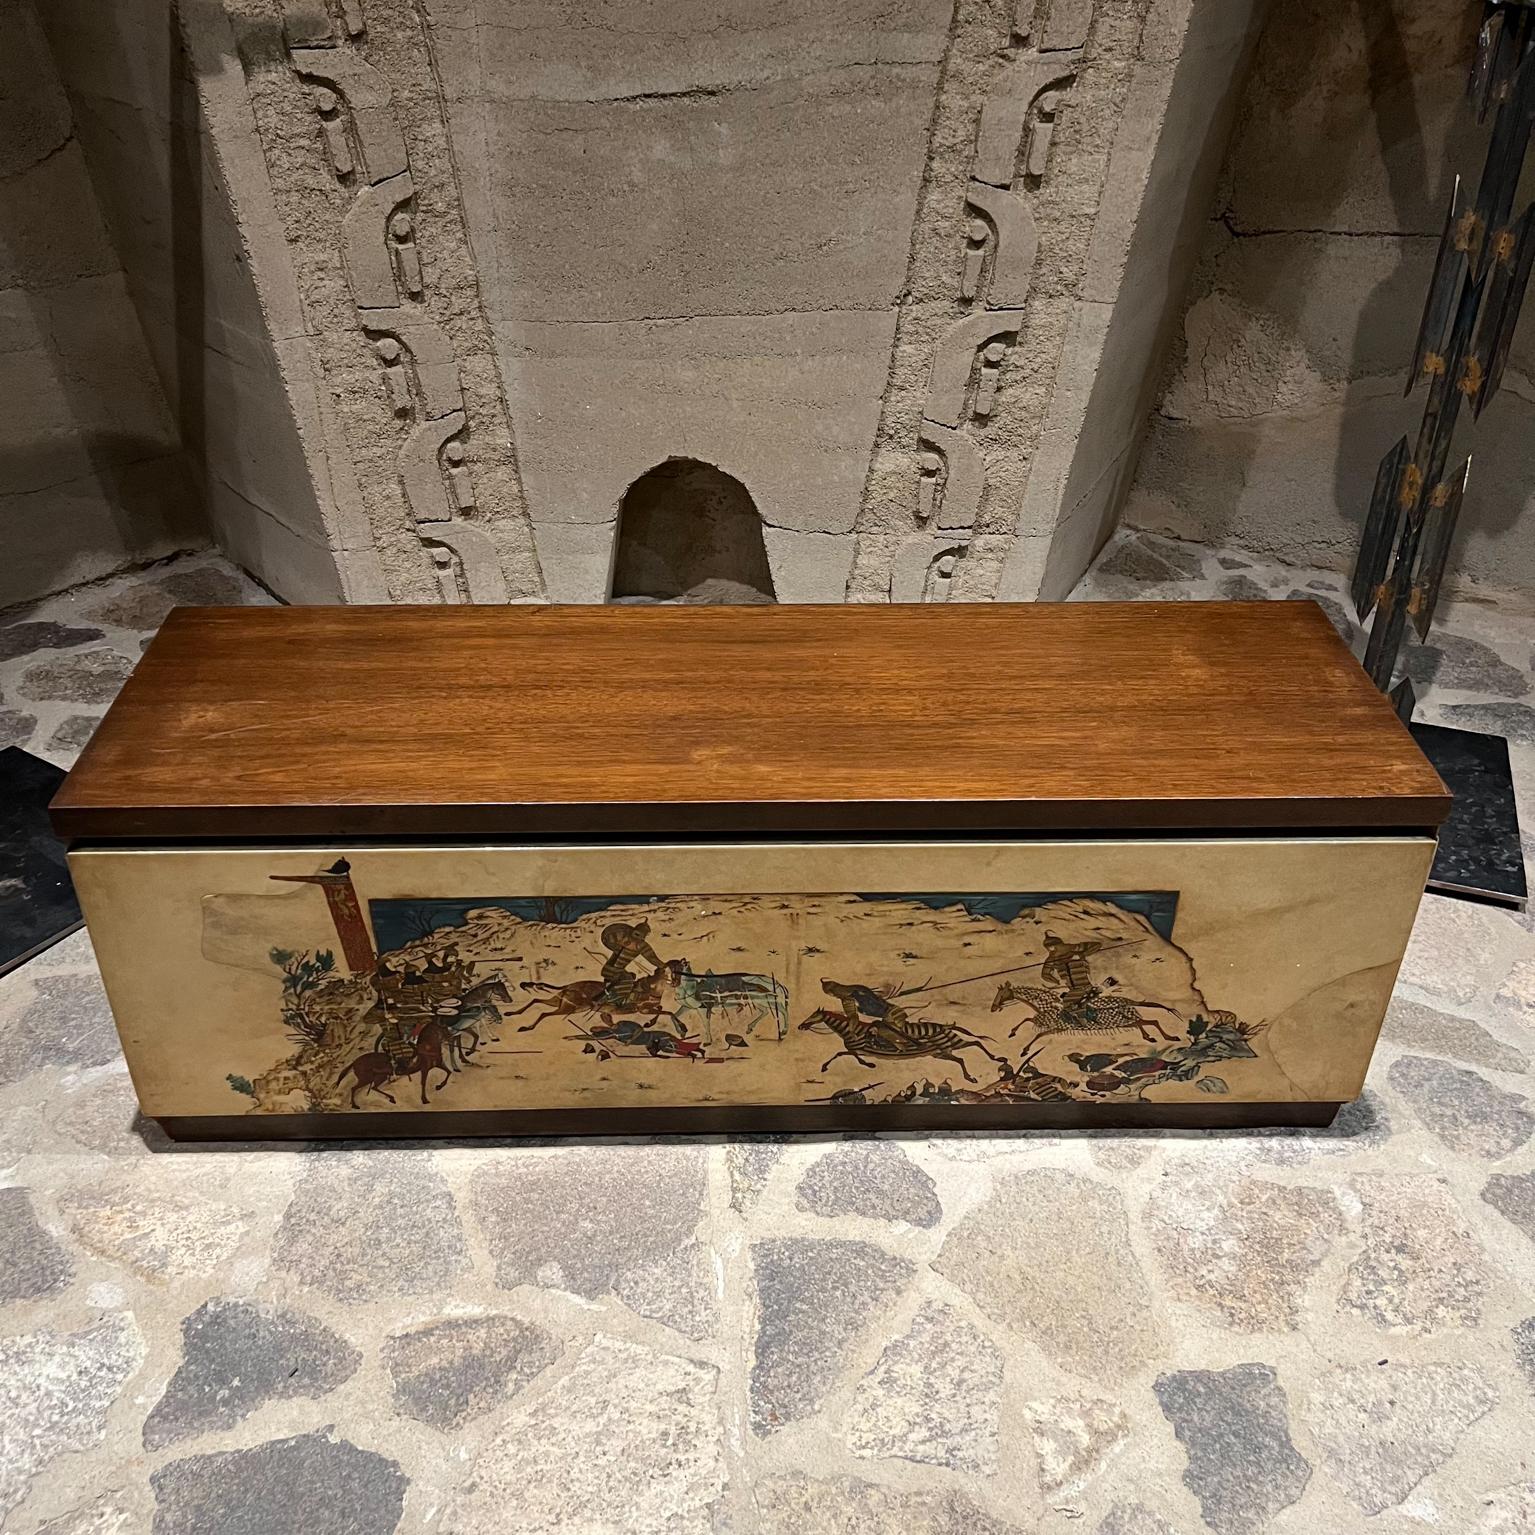 1980s María Teresa Méndez Antique Art Treasure Chest Trunk Cabinet Coffee Table 
Mexico City
Attributed to María Teresa Méndez (unsigned).
Craftmanship Quality is consistent with other work by MTM.
Hand painted-decorated in goatskin. Solid